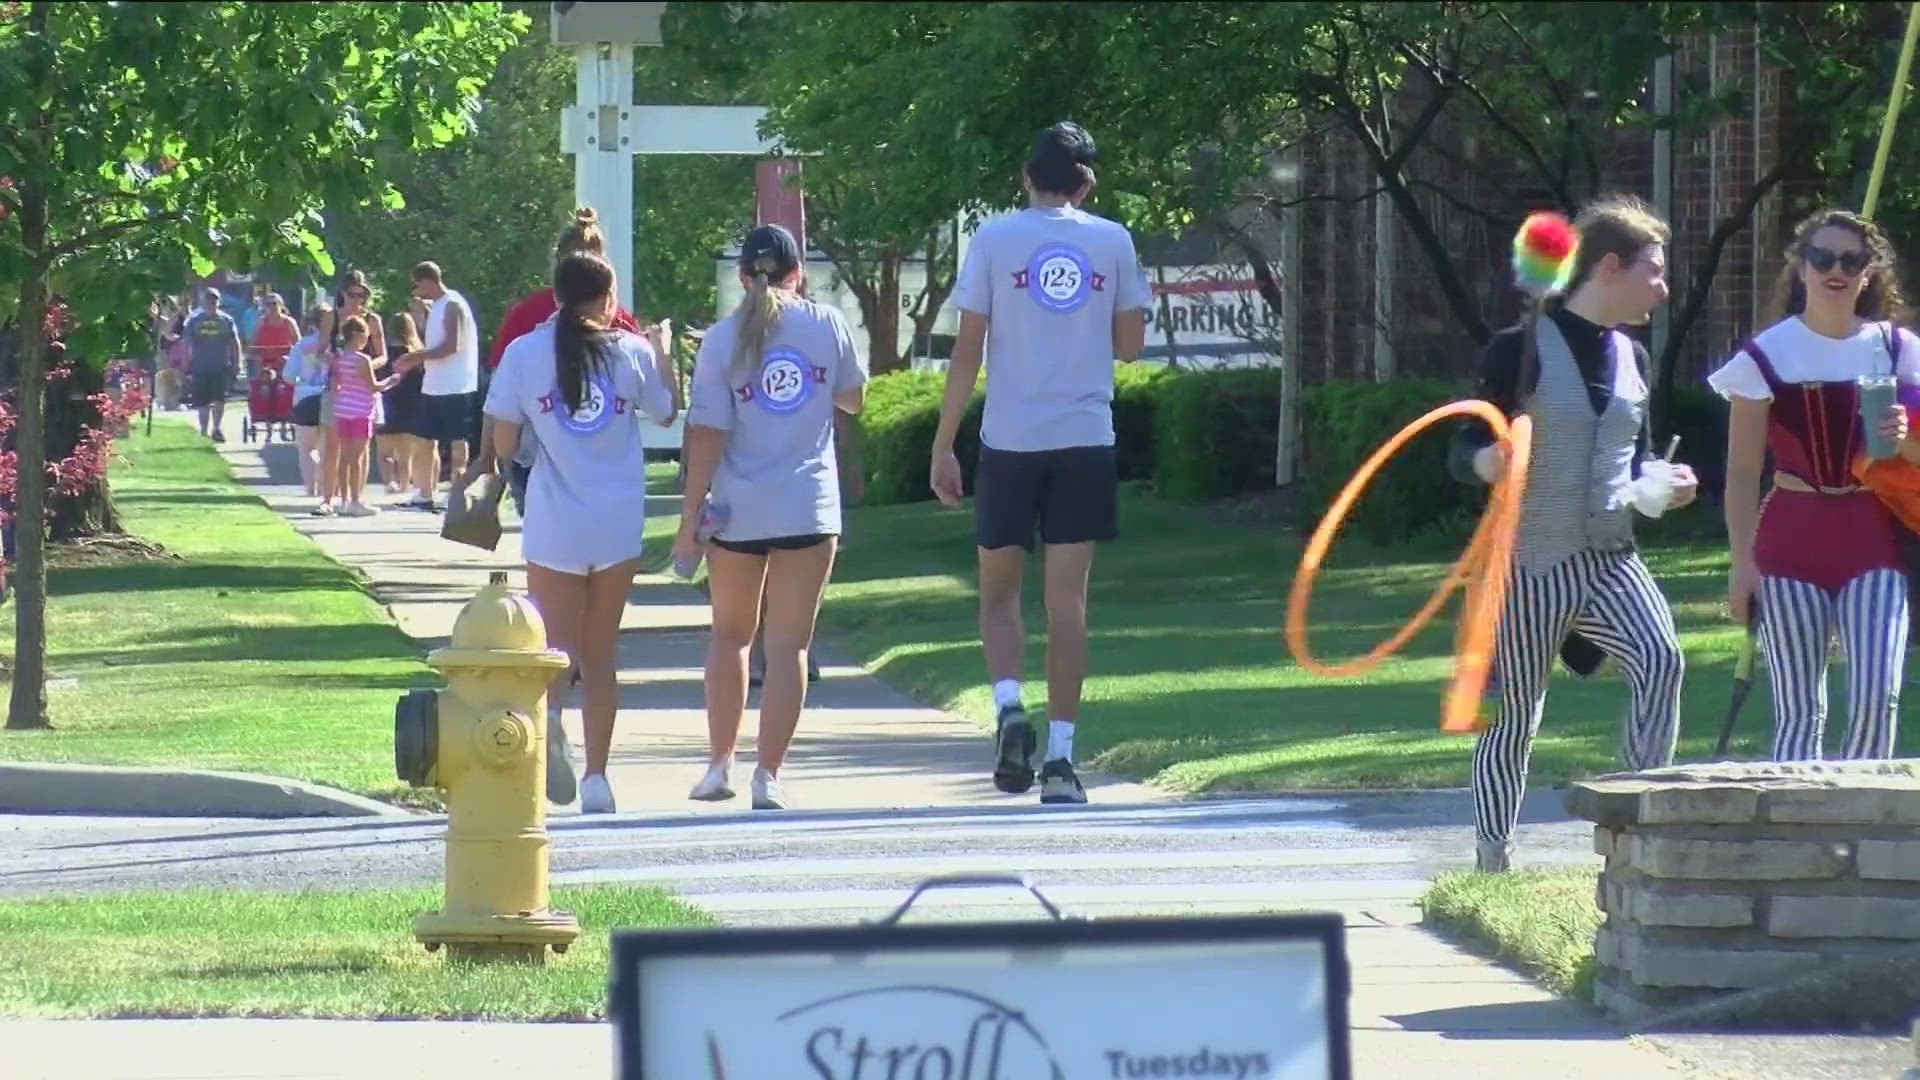 Rossford residents kicked off Stroll the Street on Tuesday as the community celebrates its 125th anniversary.